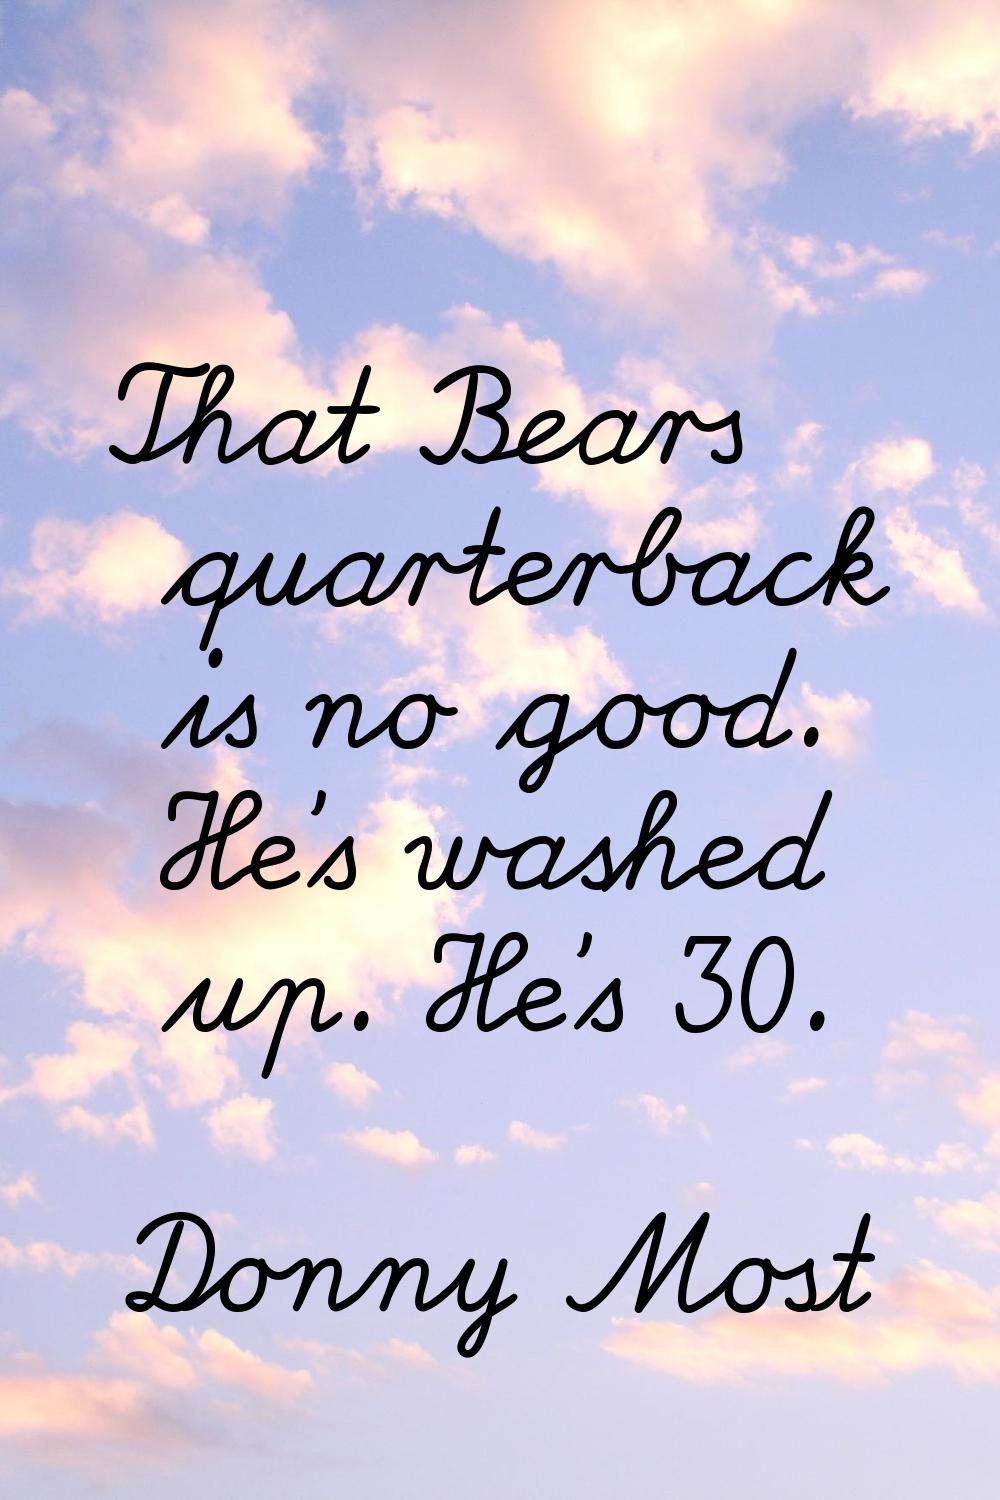 That Bears quarterback is no good. He's washed up. He's 30.